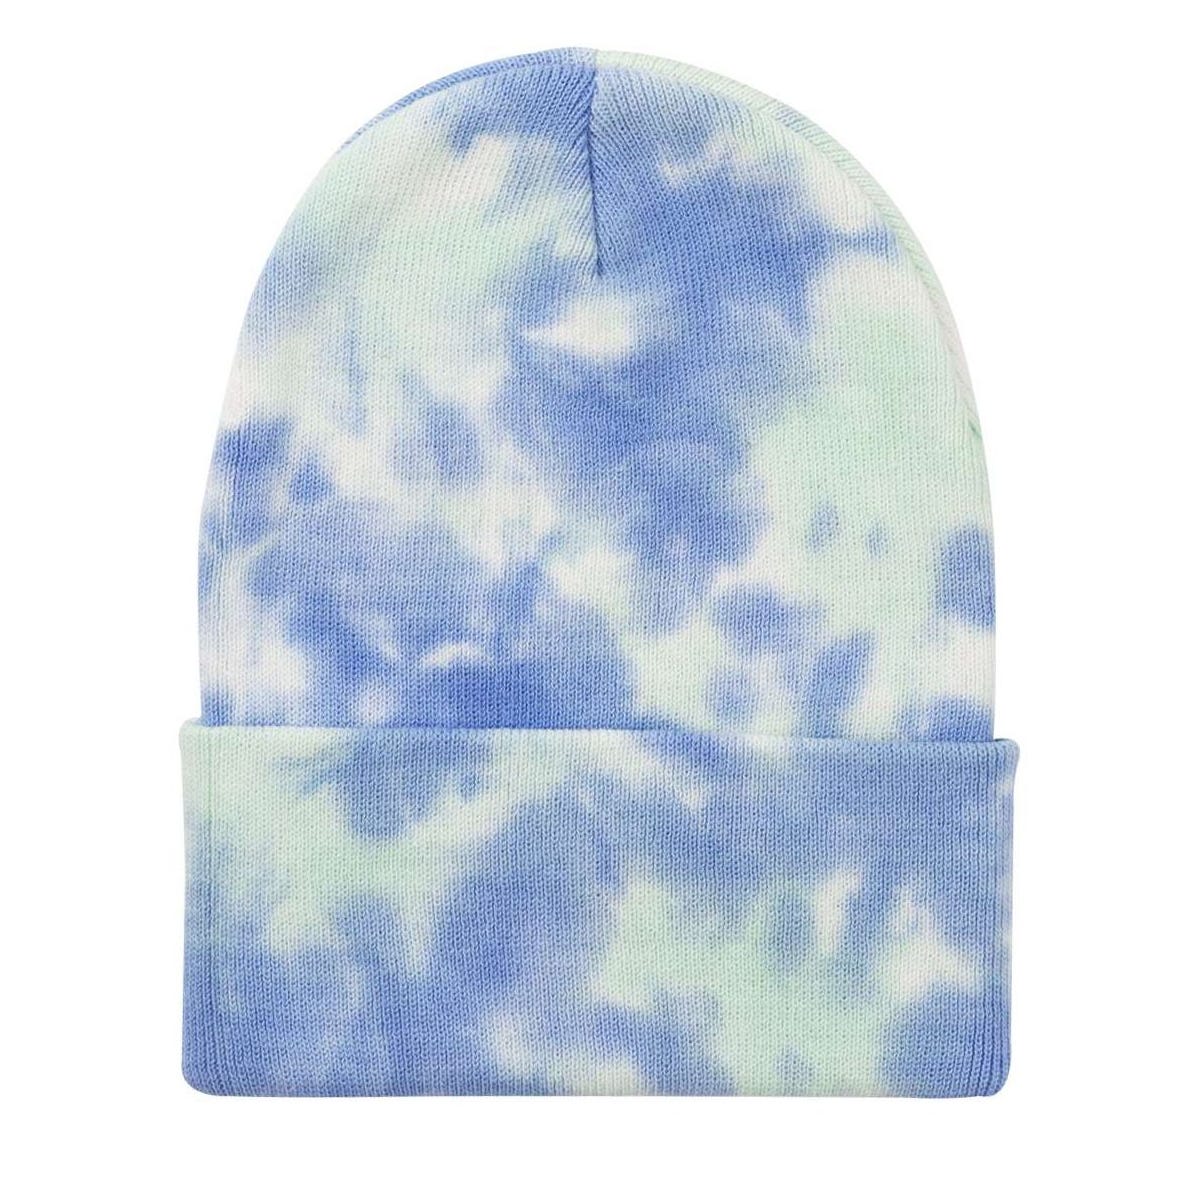 Am I Working From Home Or Living At Work Tie Dye 12" Knit Beanie